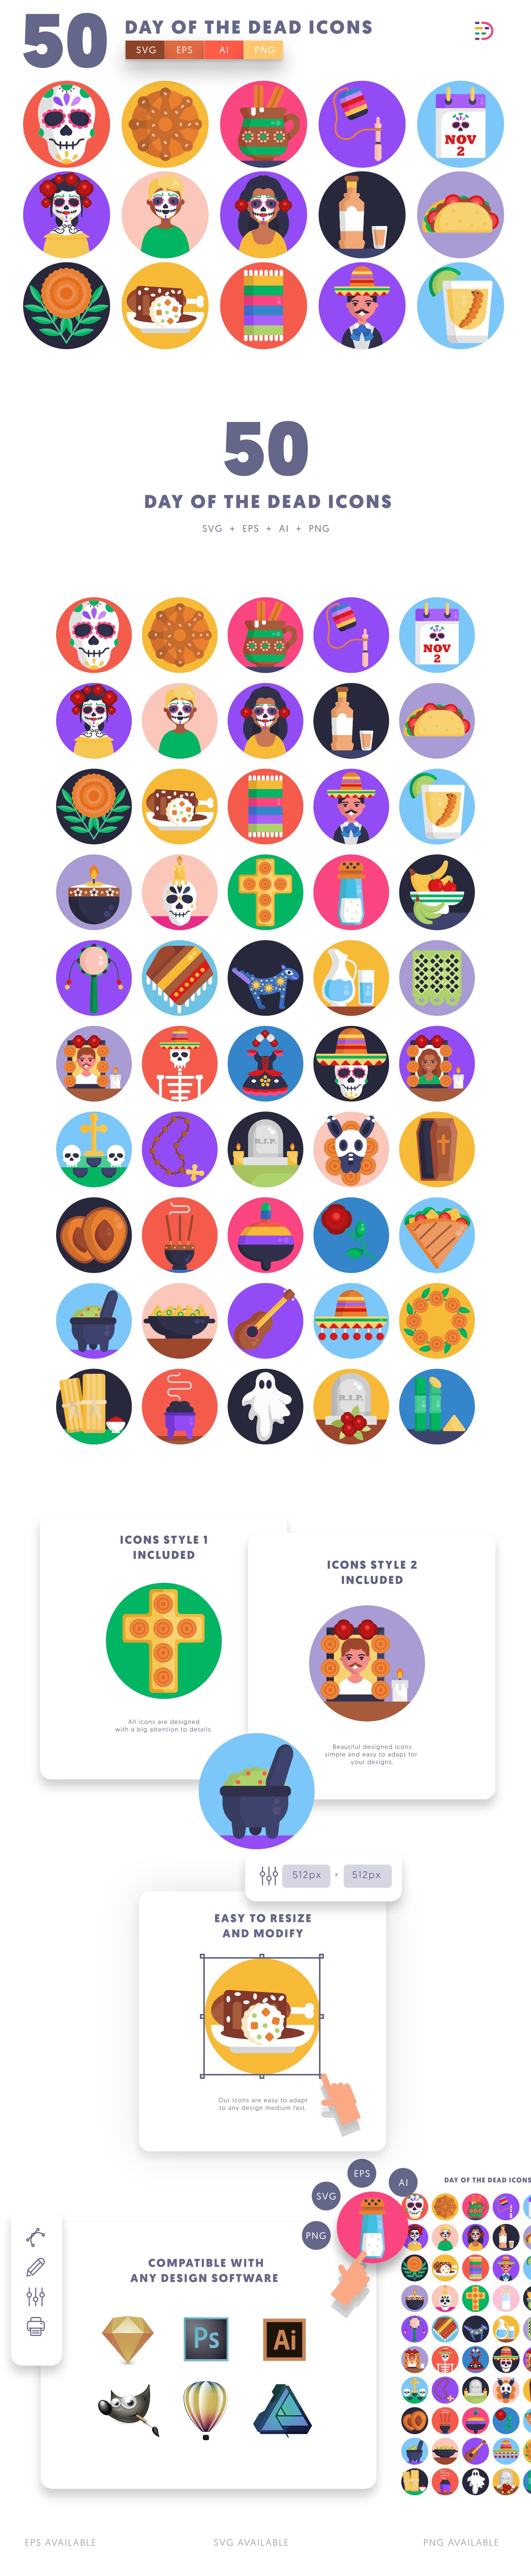 Editable day of the dead icons icon pack, easy to edit and customize icons